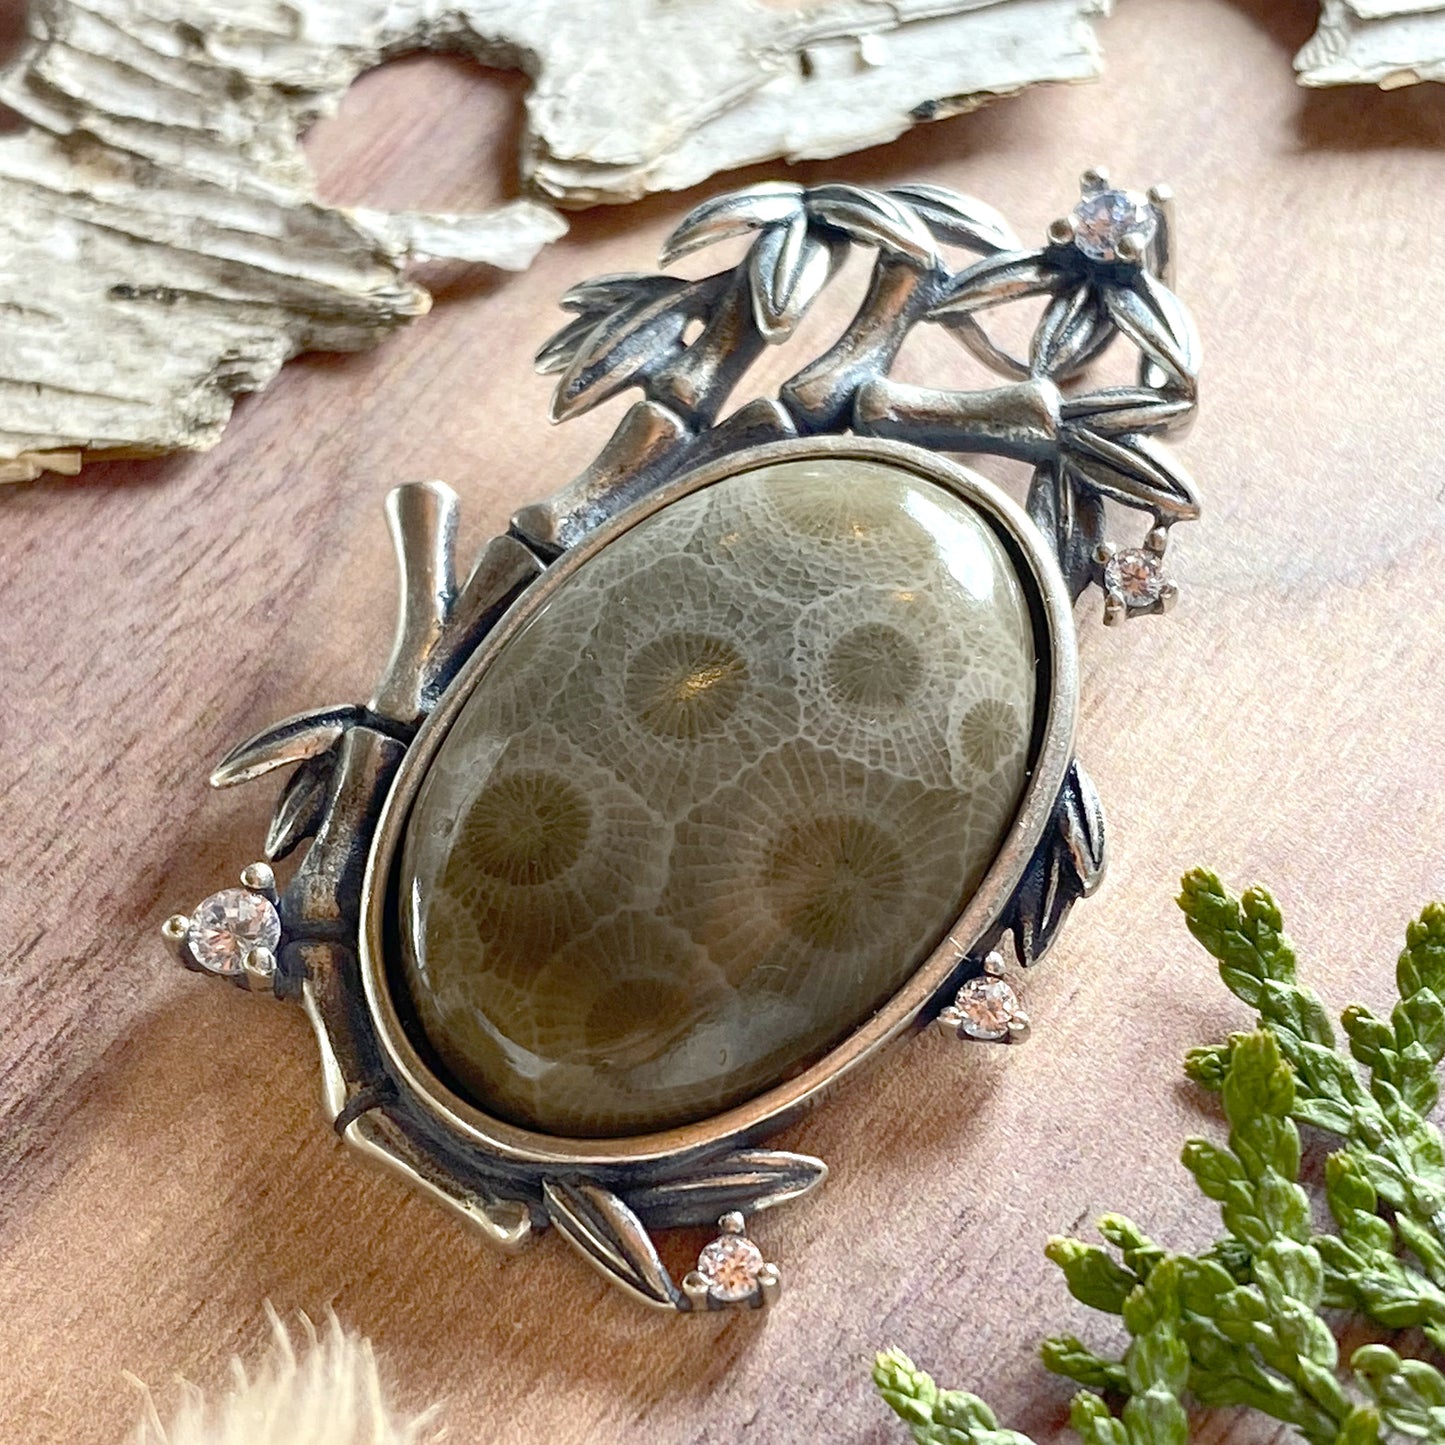 Petoskey Stone Pendant Front View III - Stone Treasures by the Lake